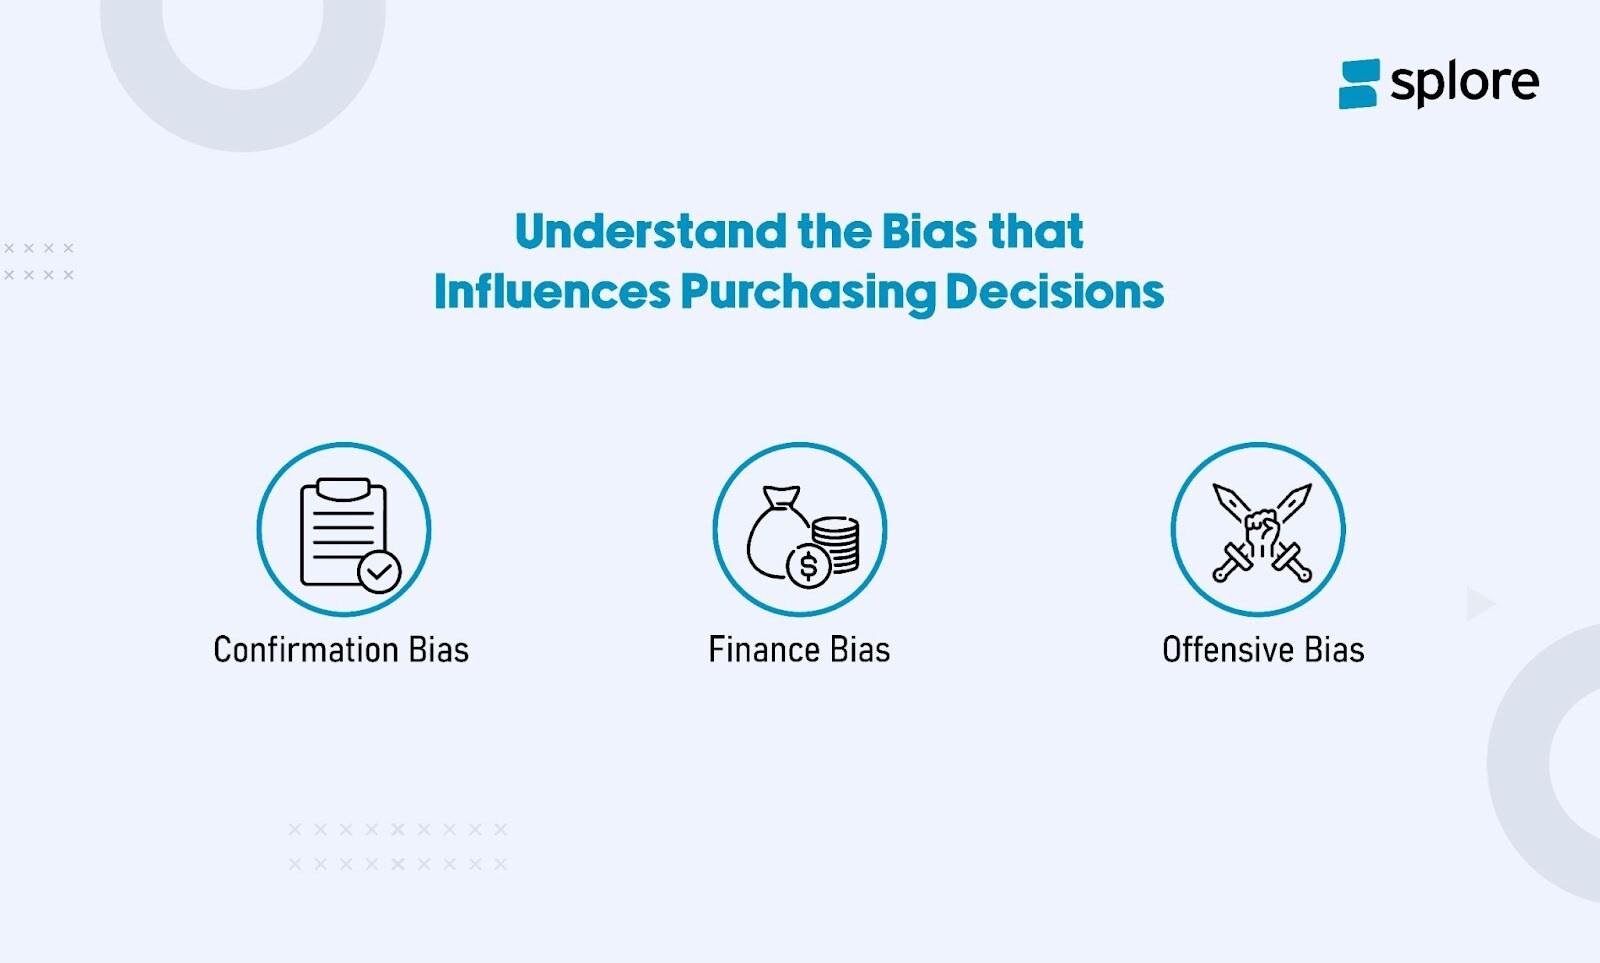 Understand the Bias that Influences Purchasing Decisions